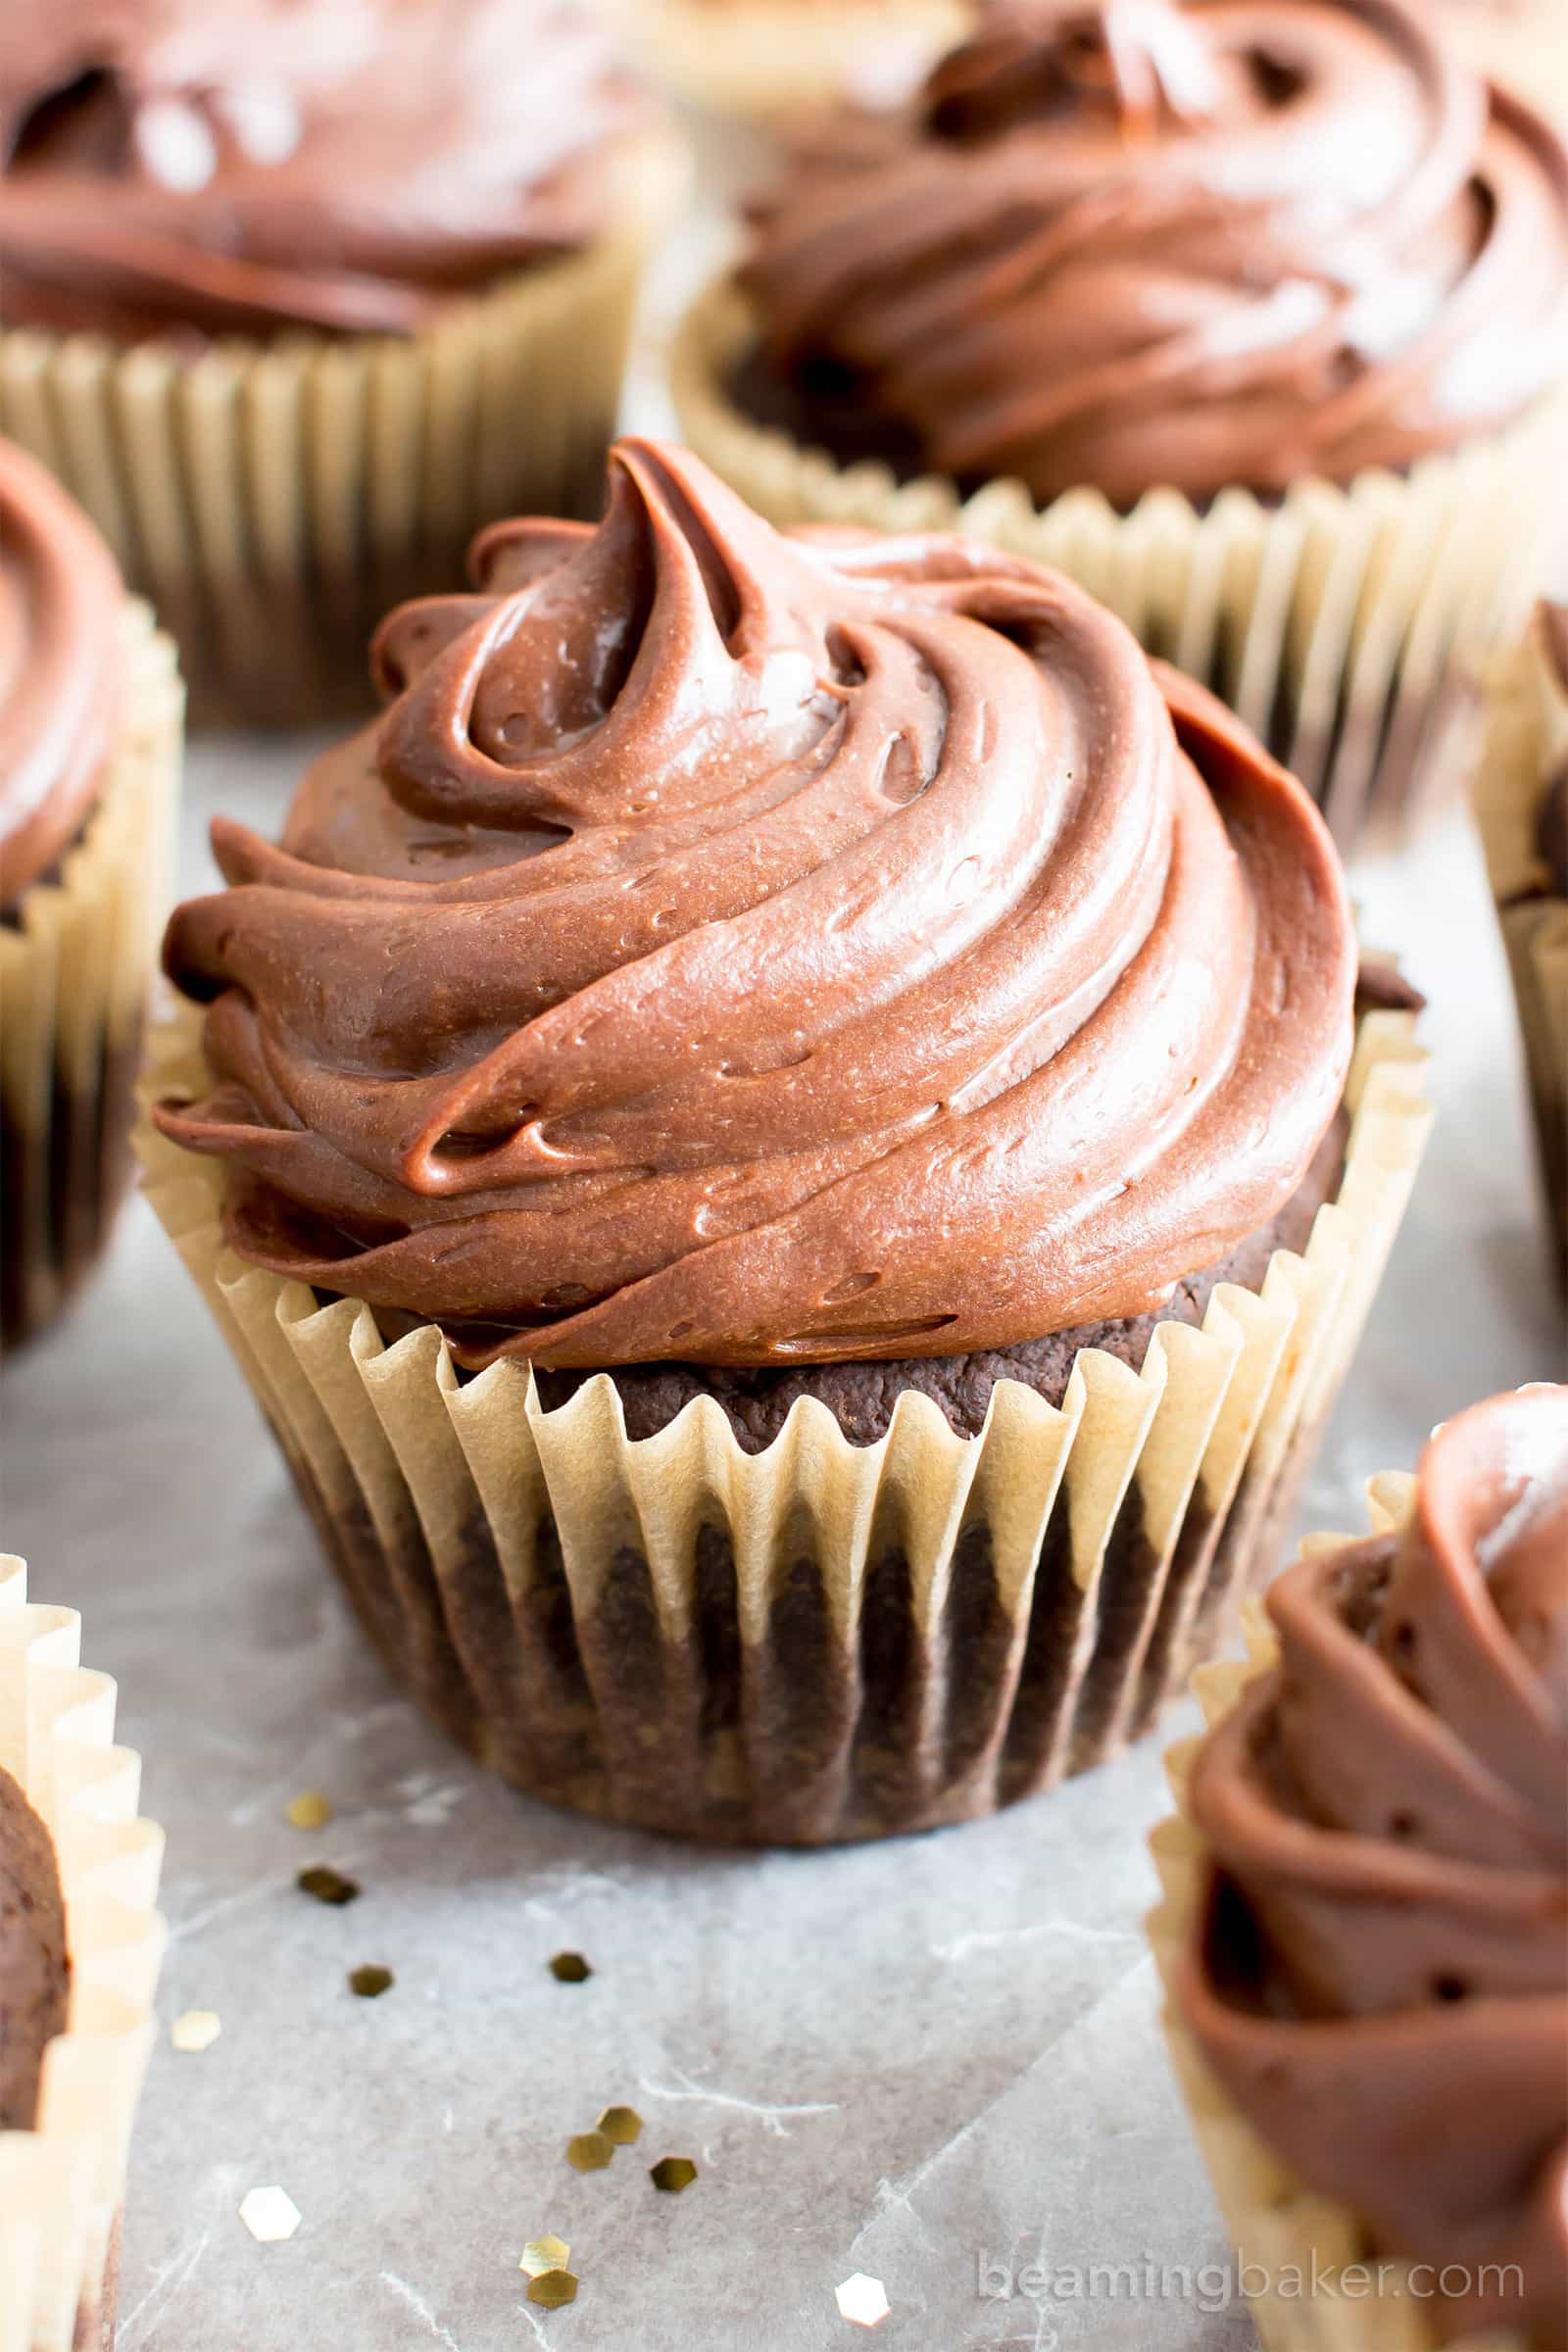 Vegan gluten free chocolate cupcakes with chocolate frosting on parchment paper